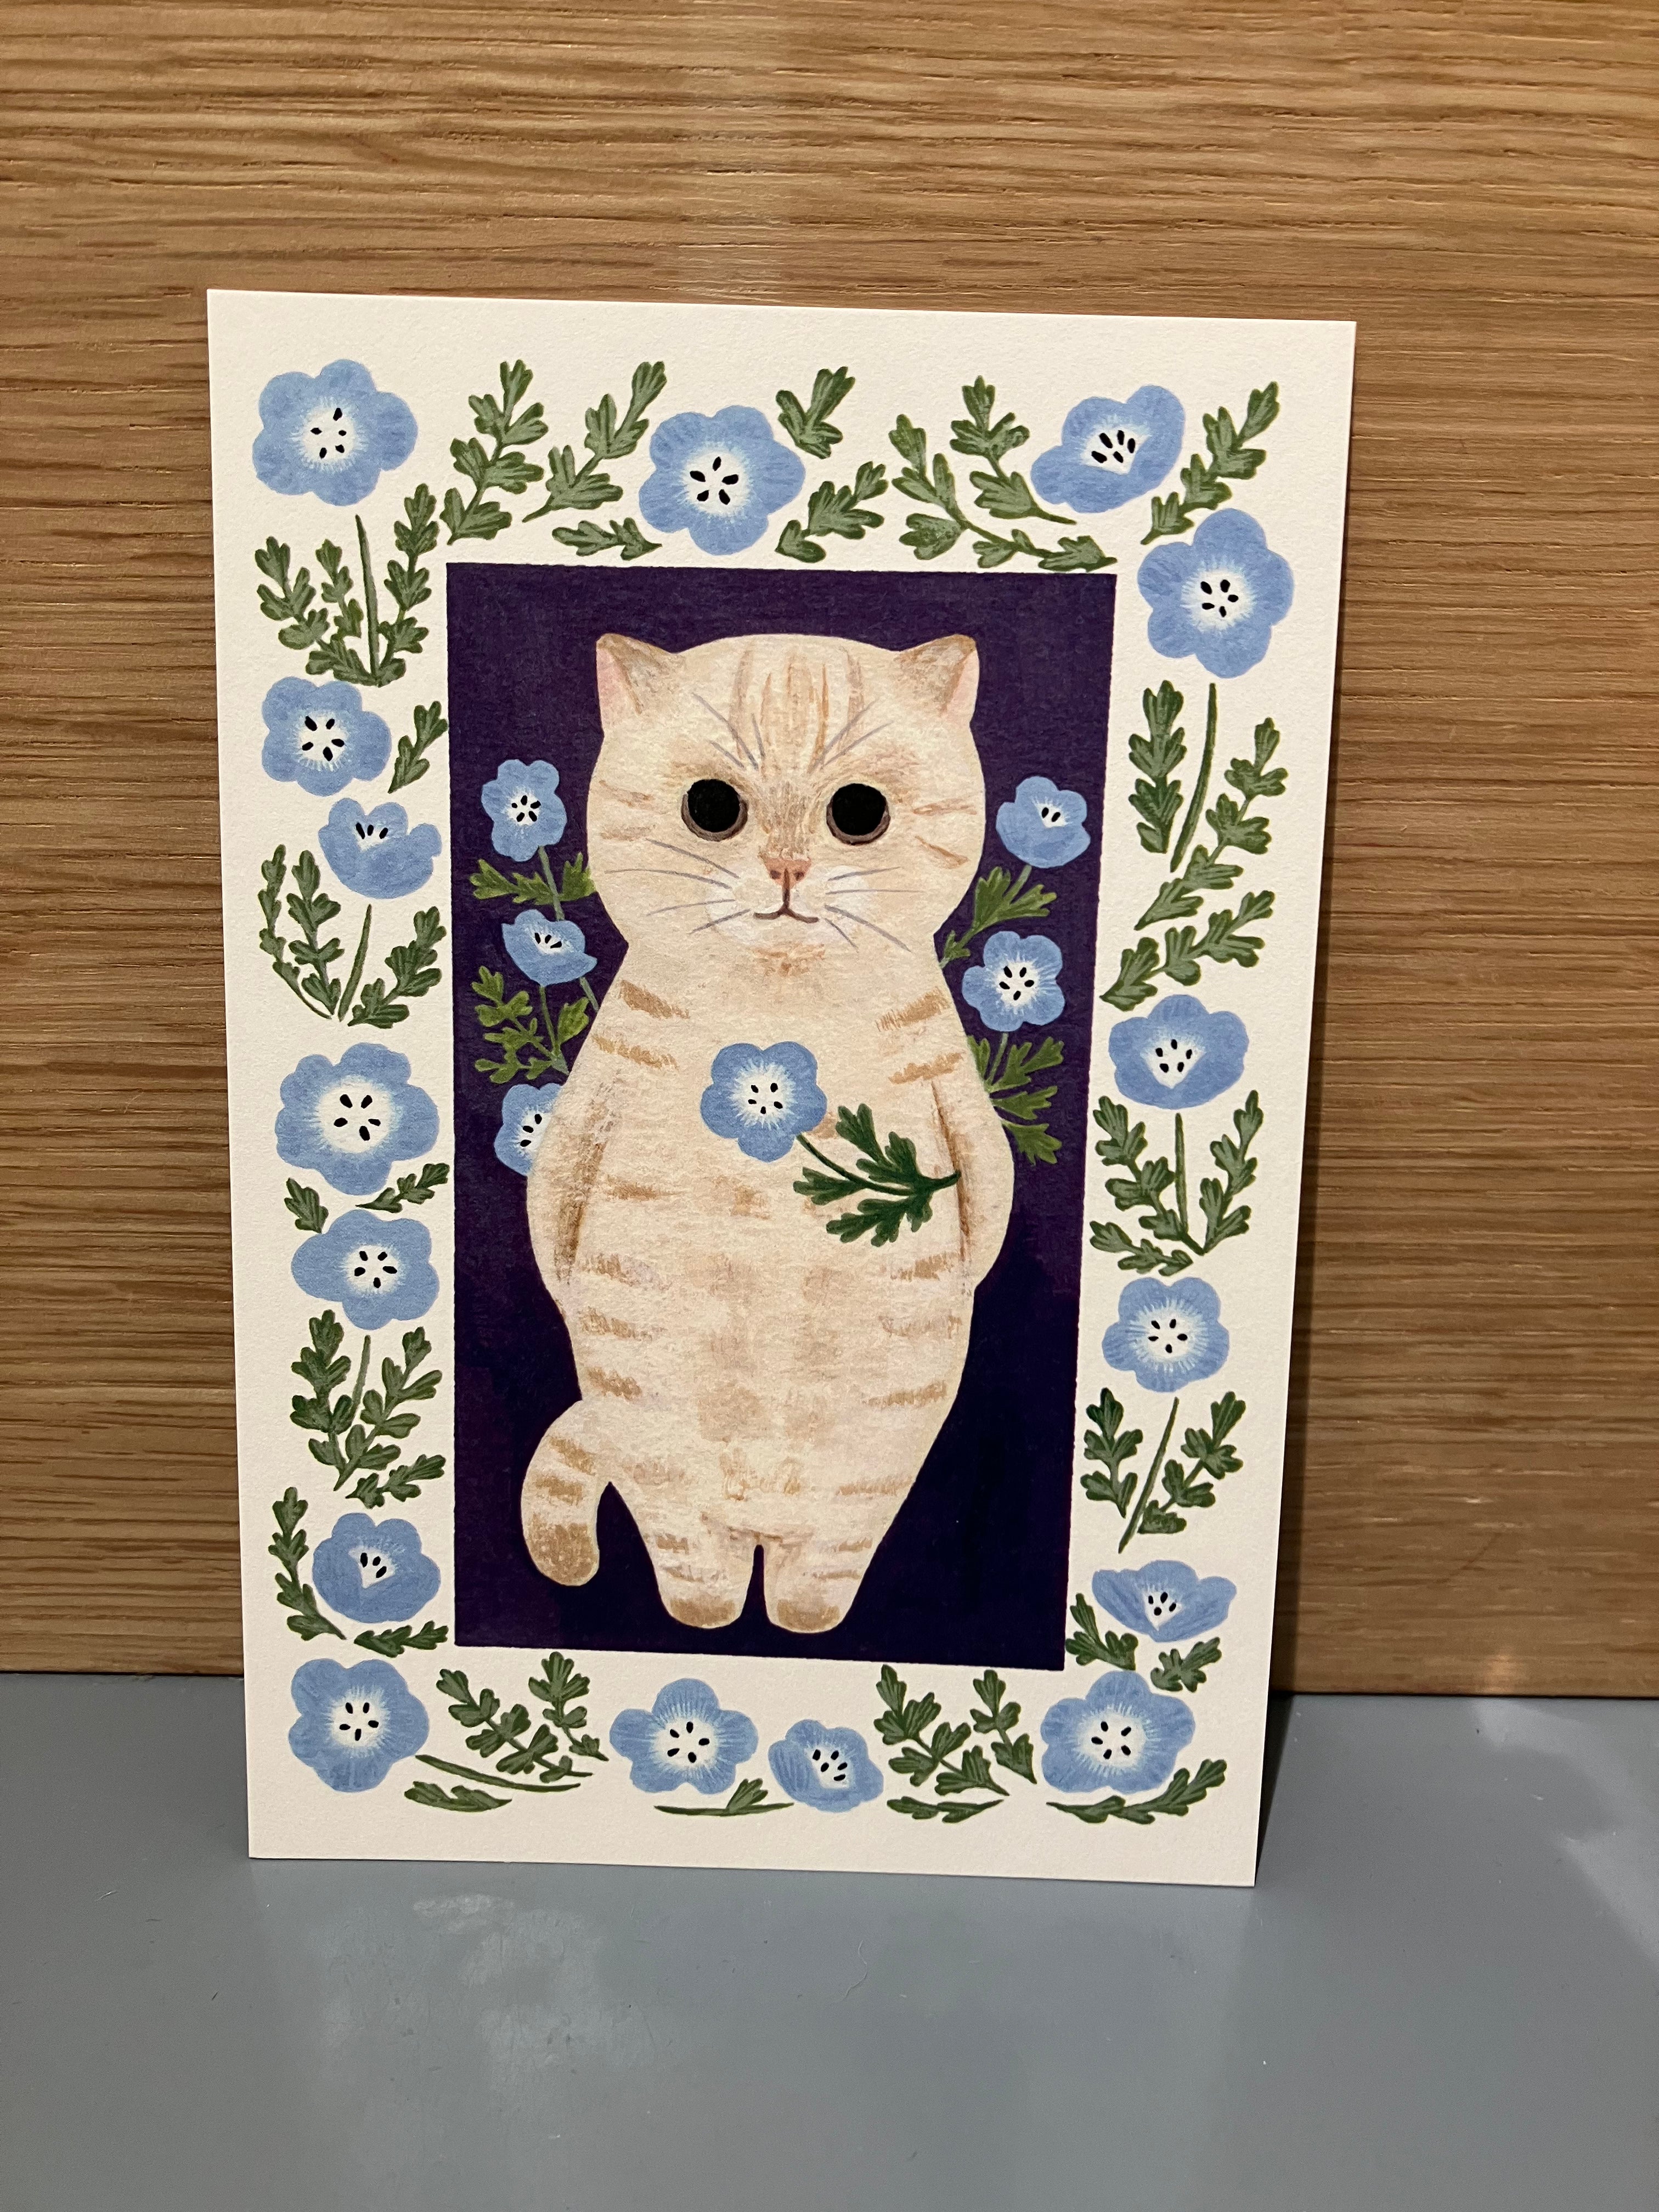 Japanese card with light gray cat holding light blue flowers